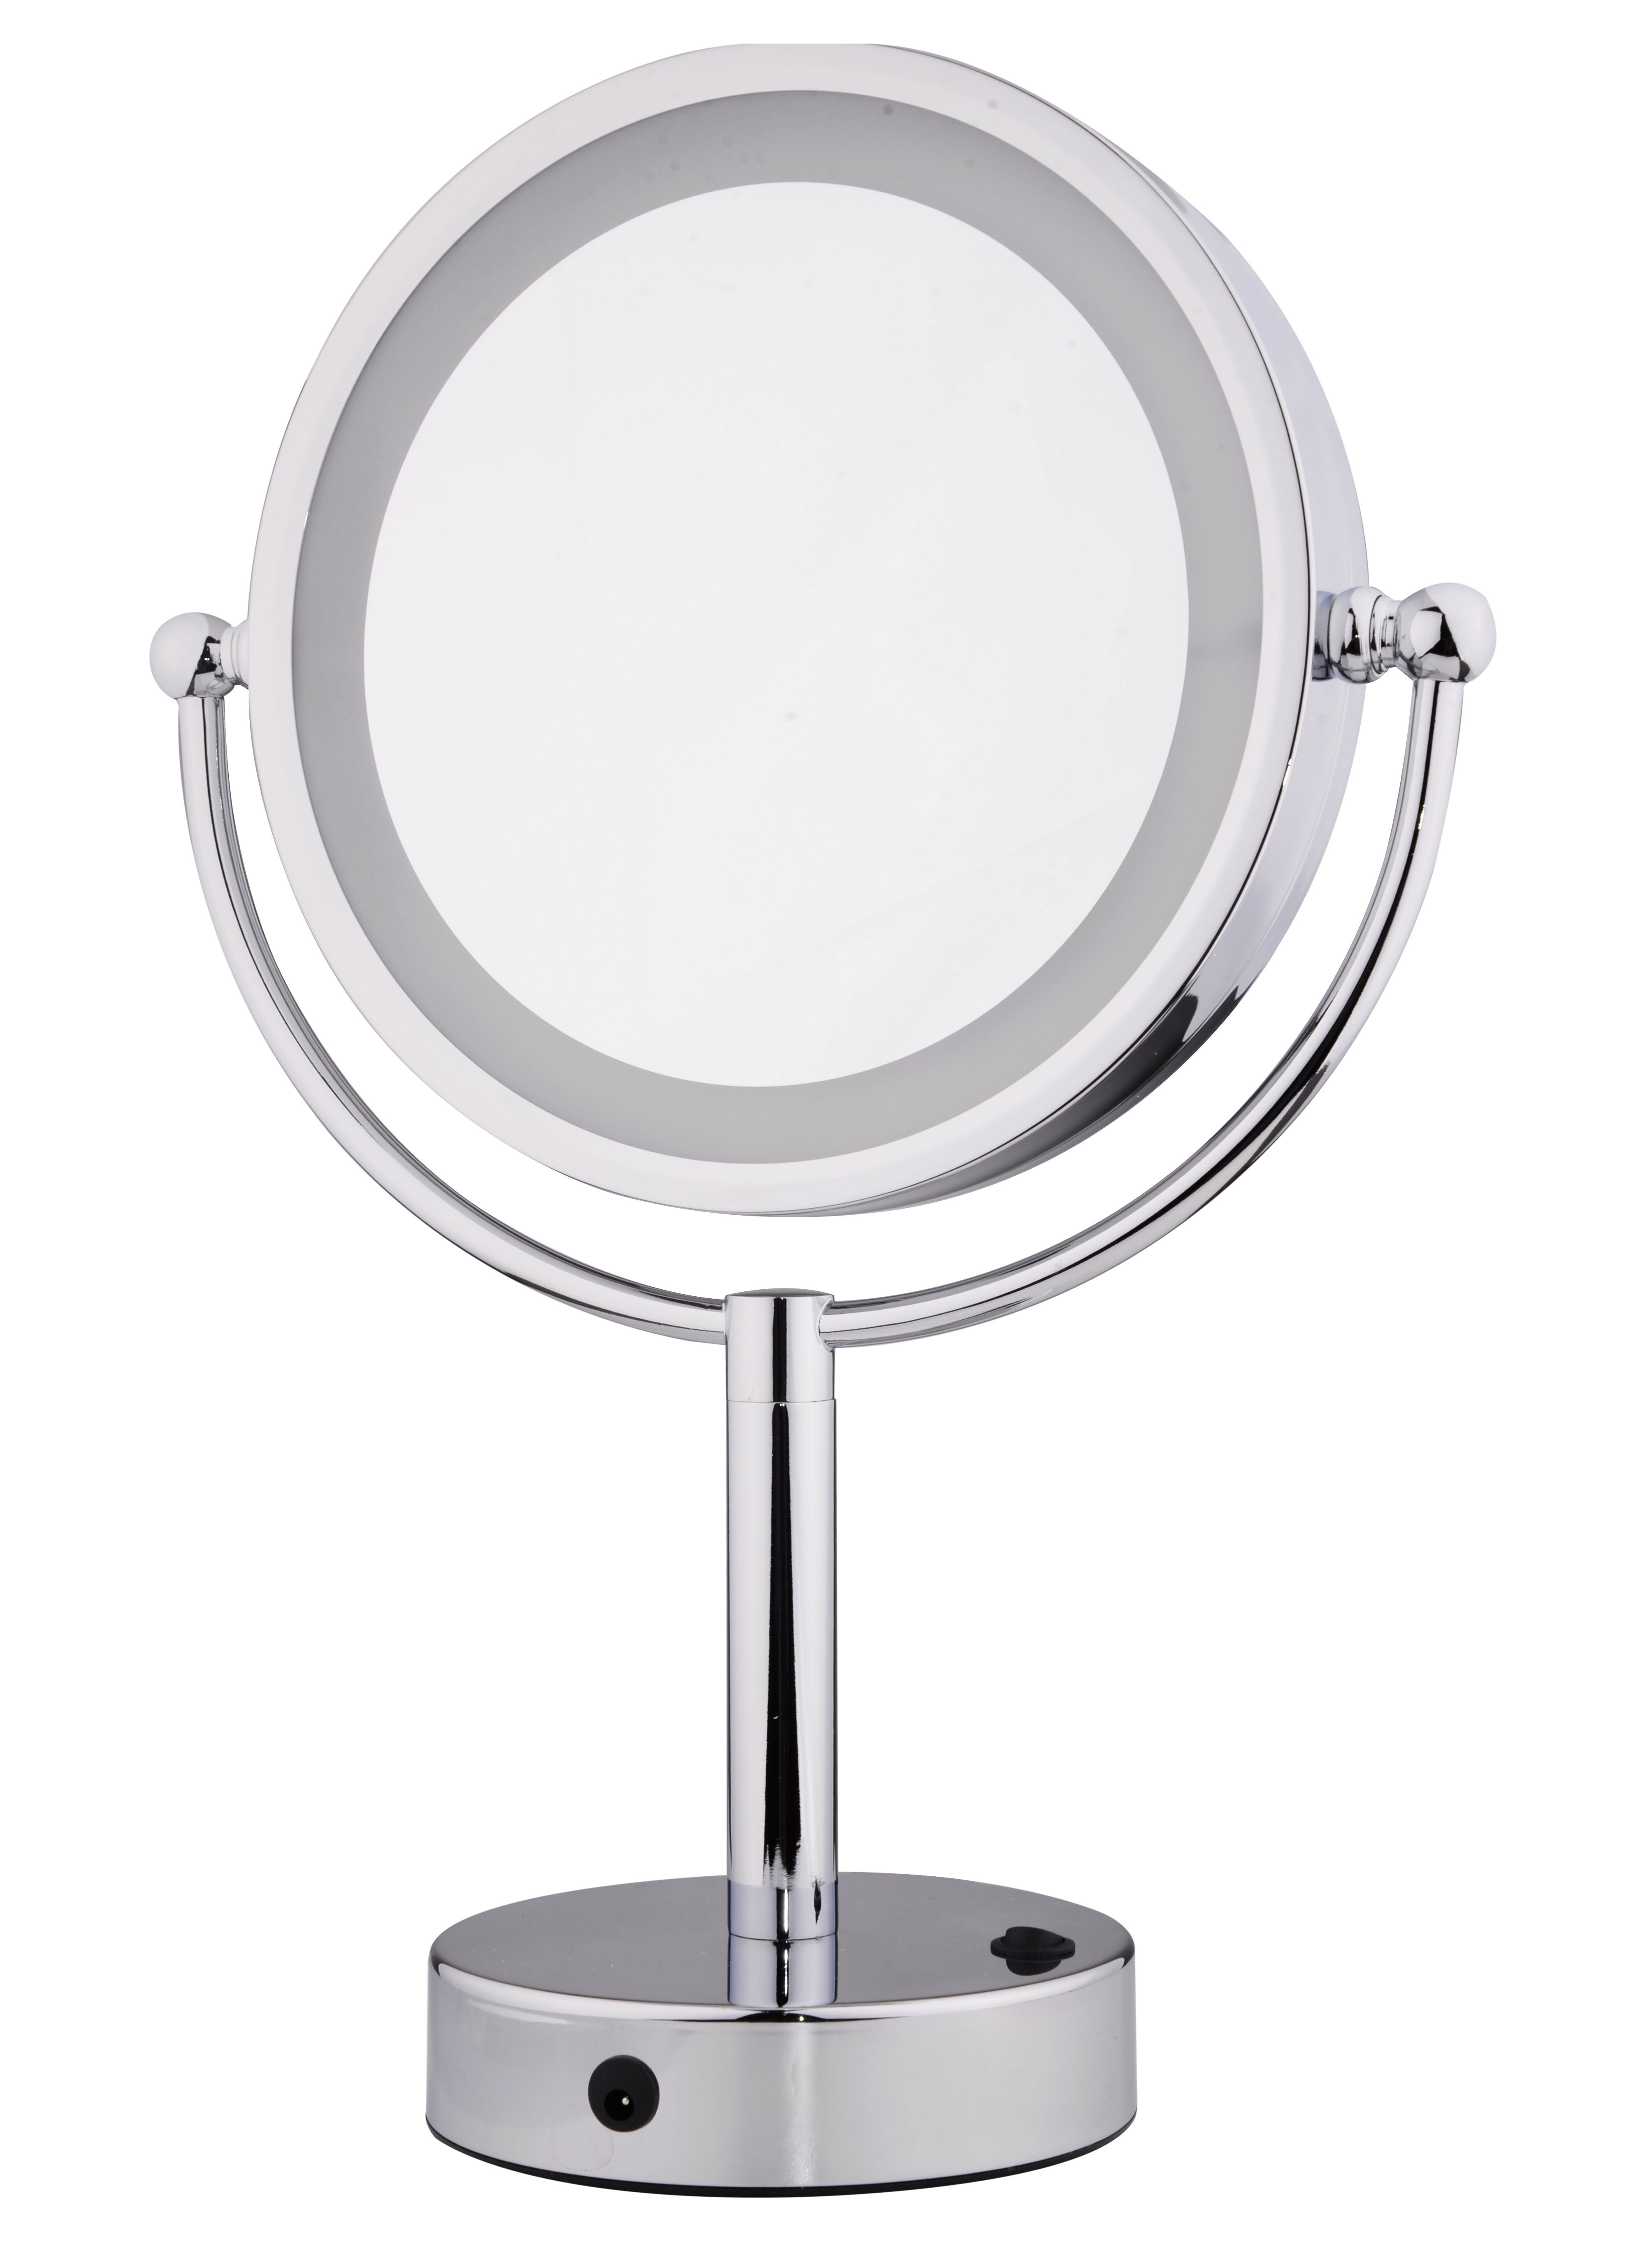 ICO Bath V9013 8.5" Double Sided Lighted Freestanding Mirror - Chrome